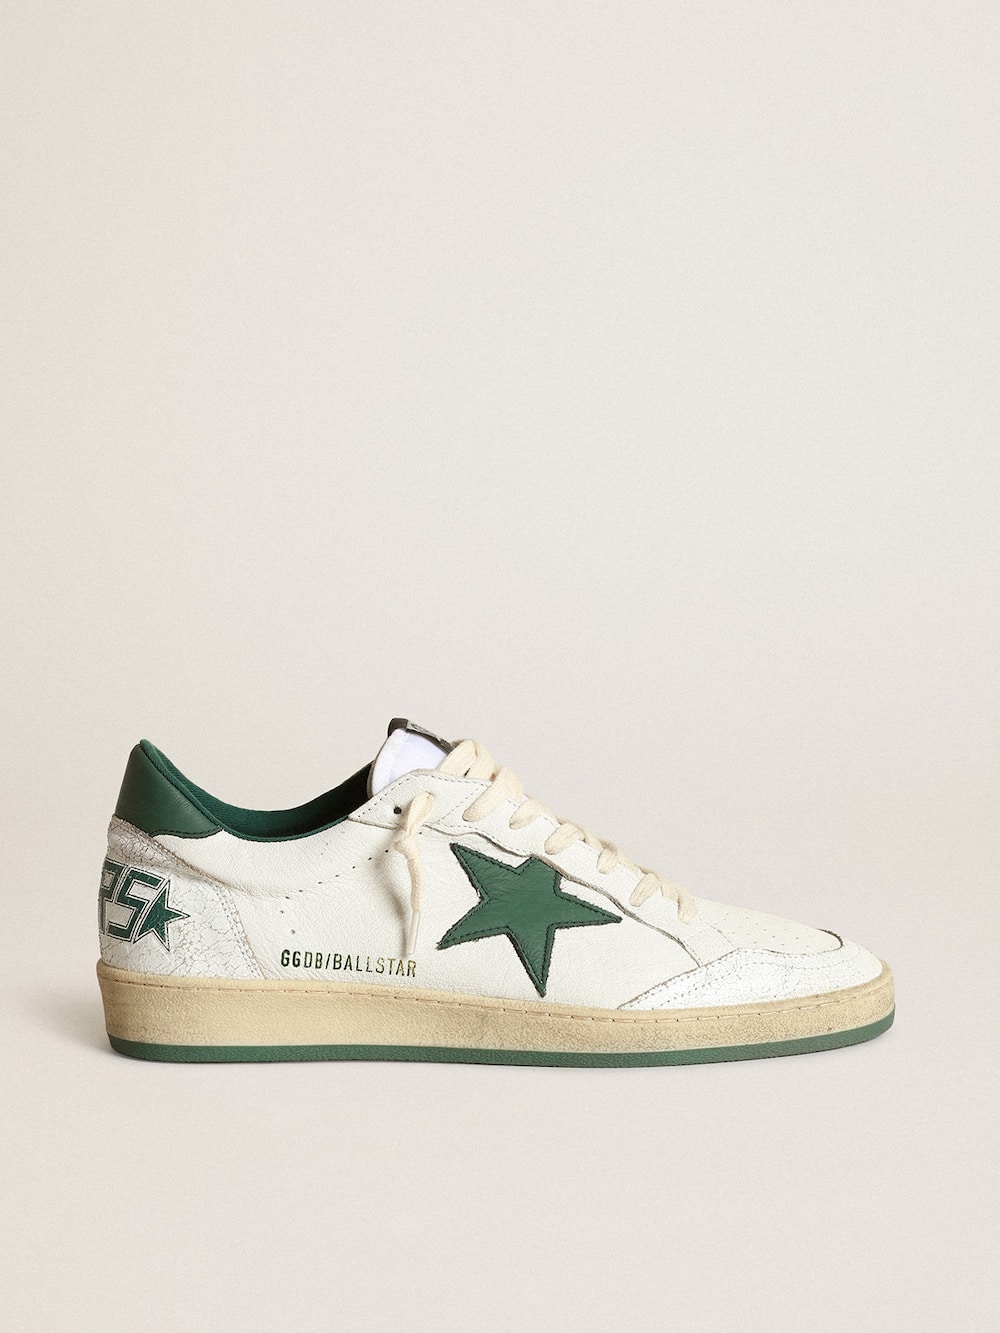 Golden Goose - Women's Ball Star in white nappa leather with green leather star and heel tab in 